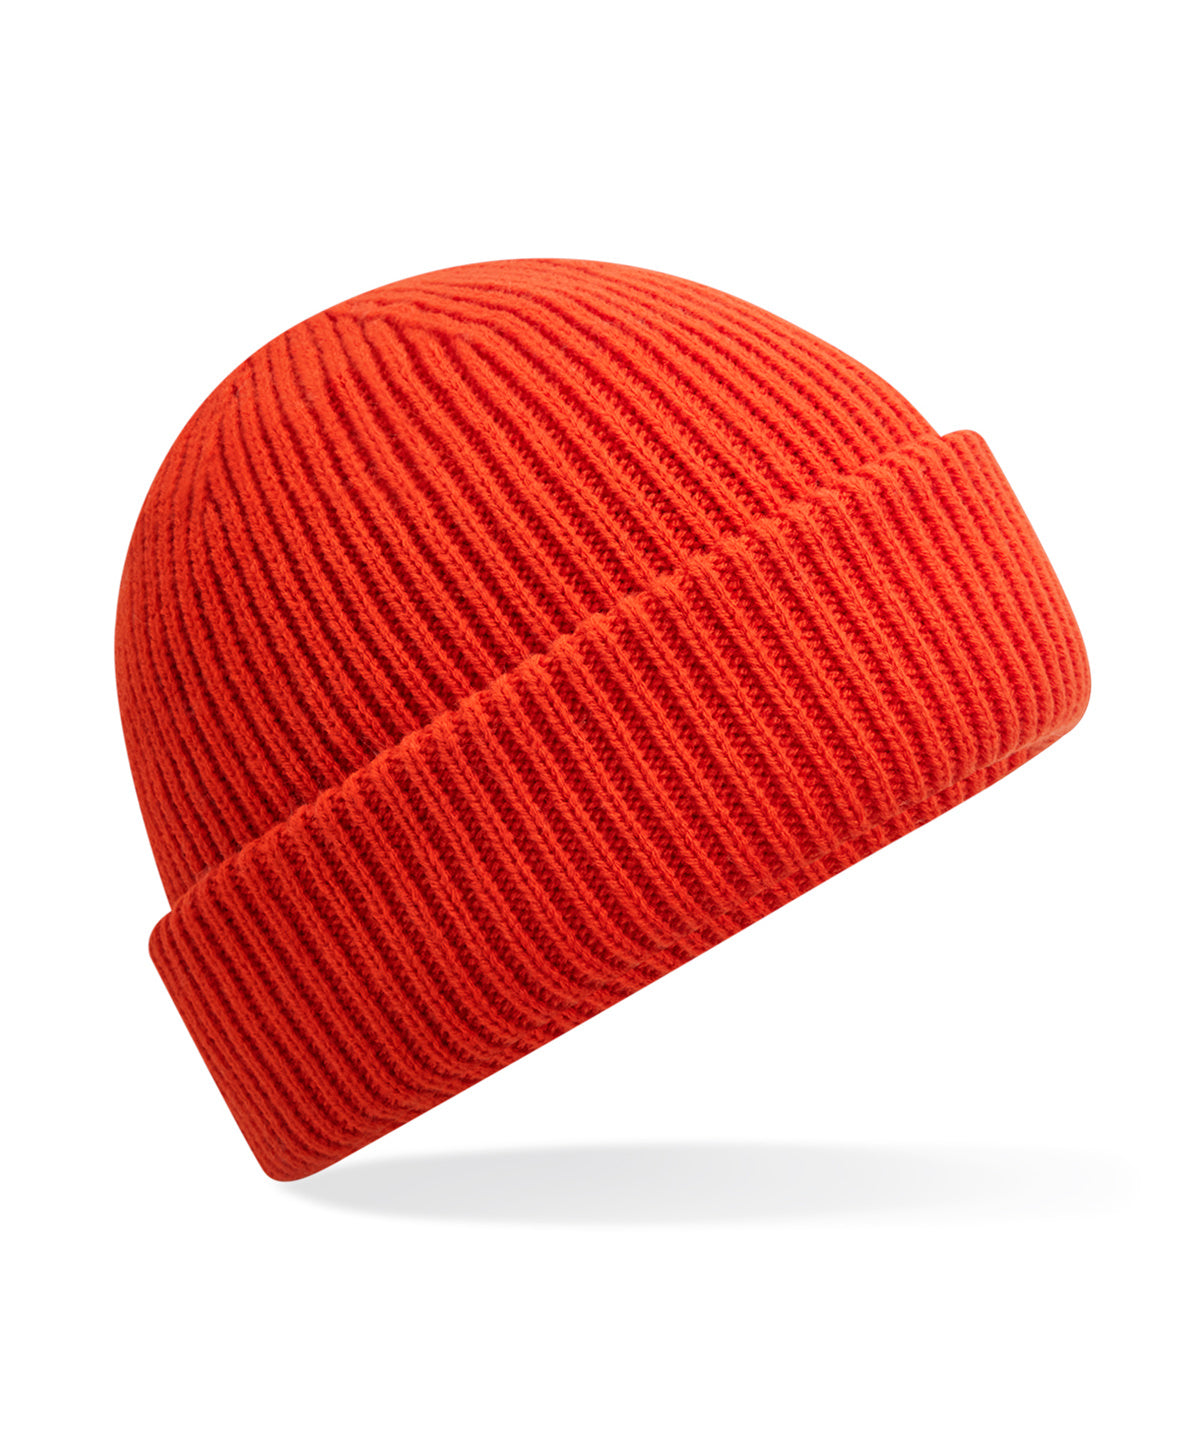 Personalised Hats - Mid Red Beechfield Wind-resistant breathable elements beanie